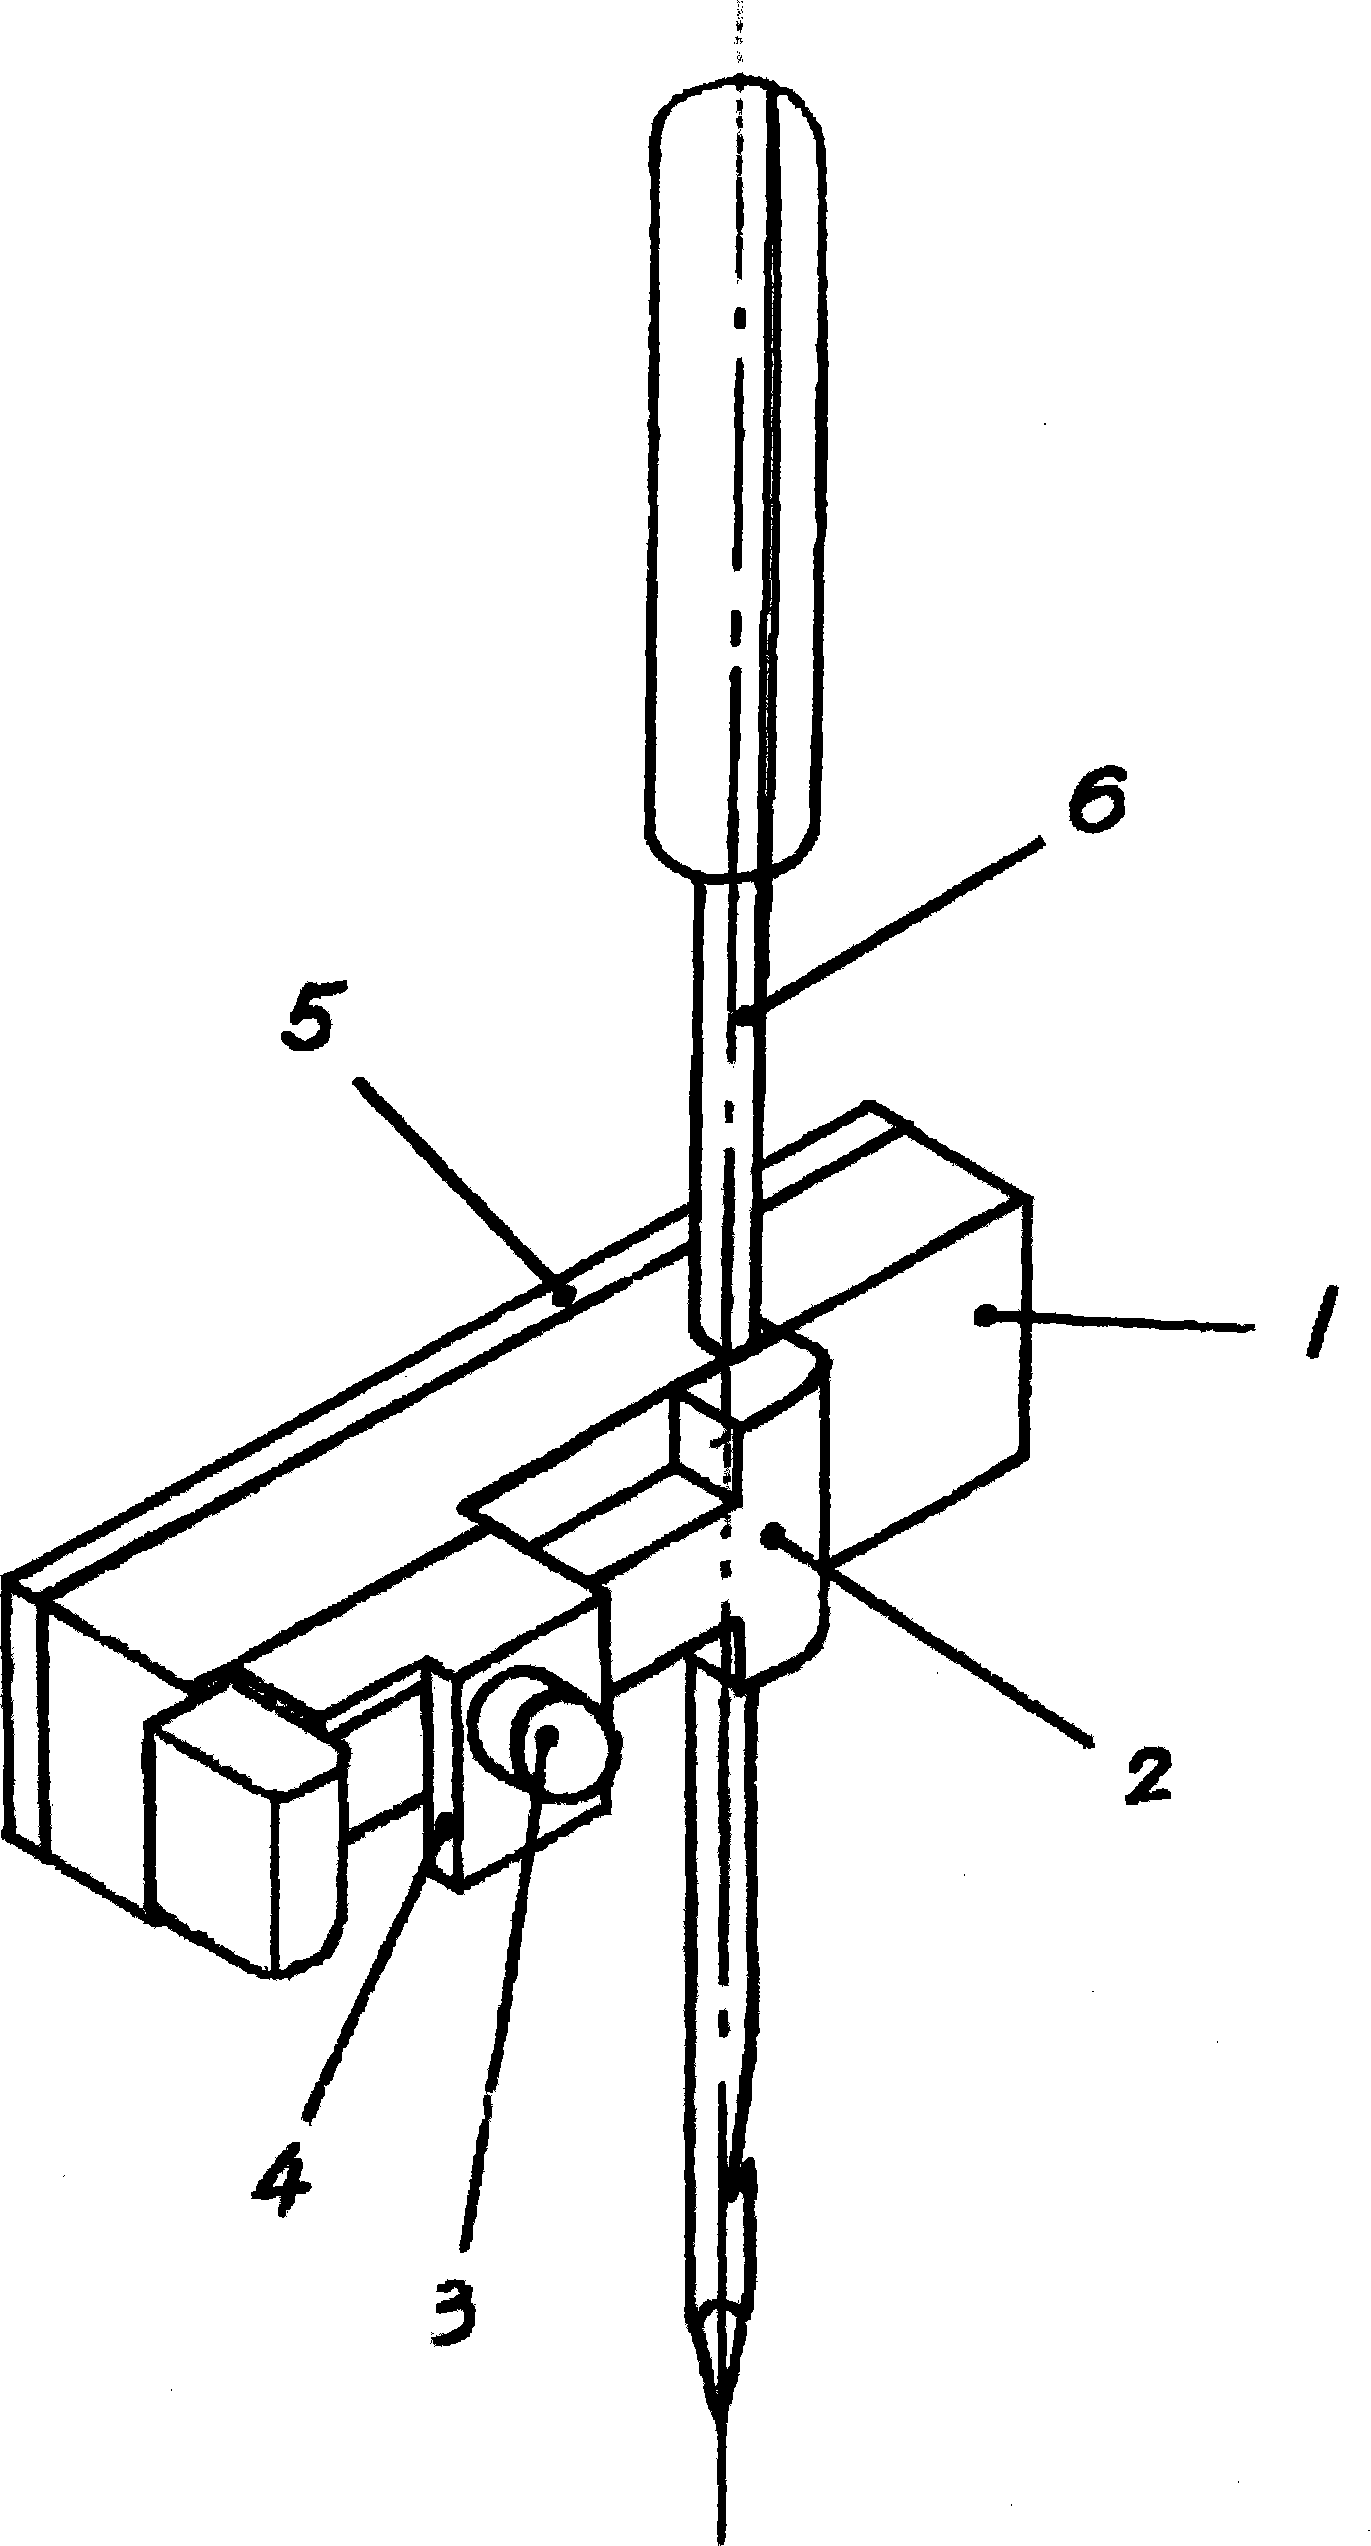 Electro-optical distance measurement system of non-contact measurement